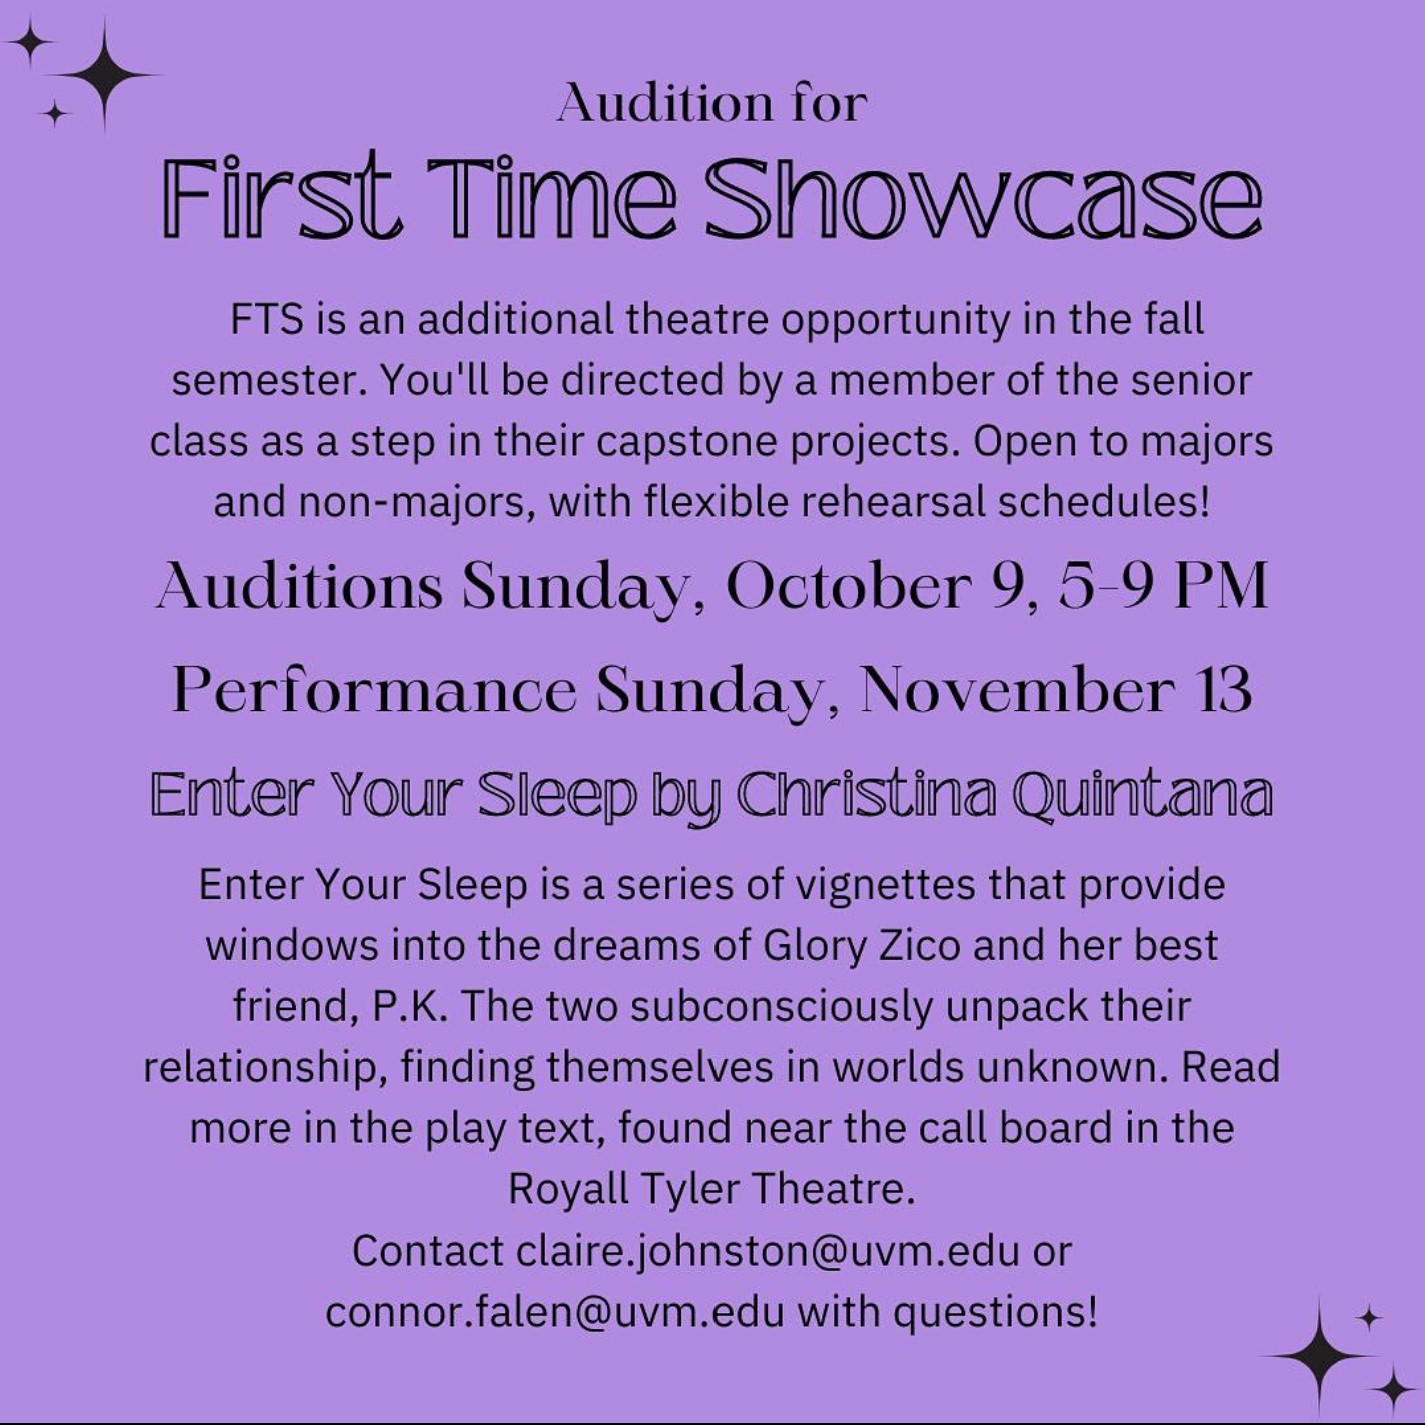 A poster for the First Time Showcase explaining details for the audition process